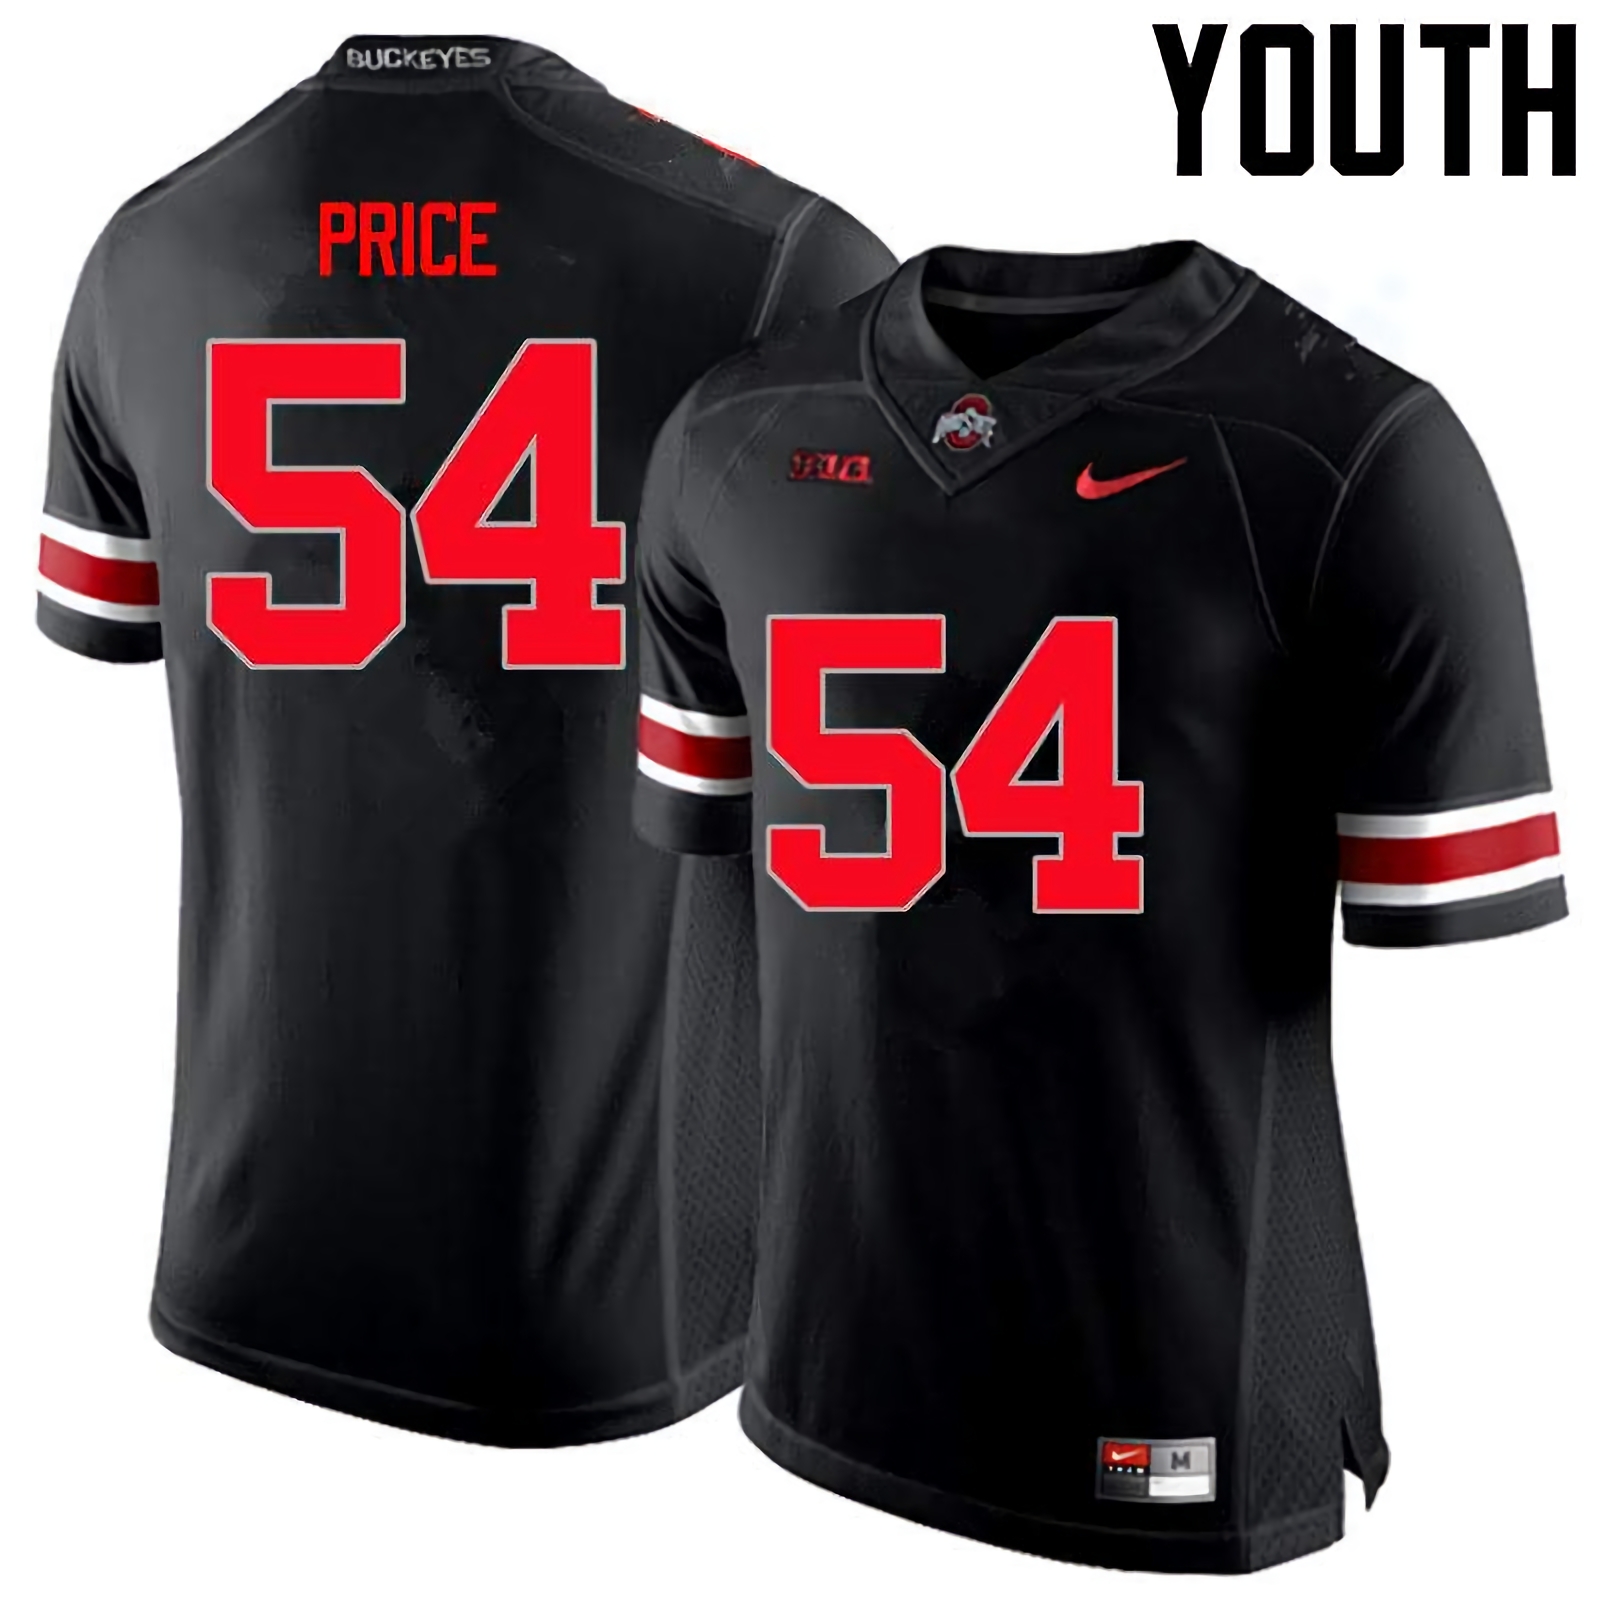 Billy Price Ohio State Buckeyes Youth NCAA #54 Nike Black Limited College Stitched Football Jersey HUK1456KE